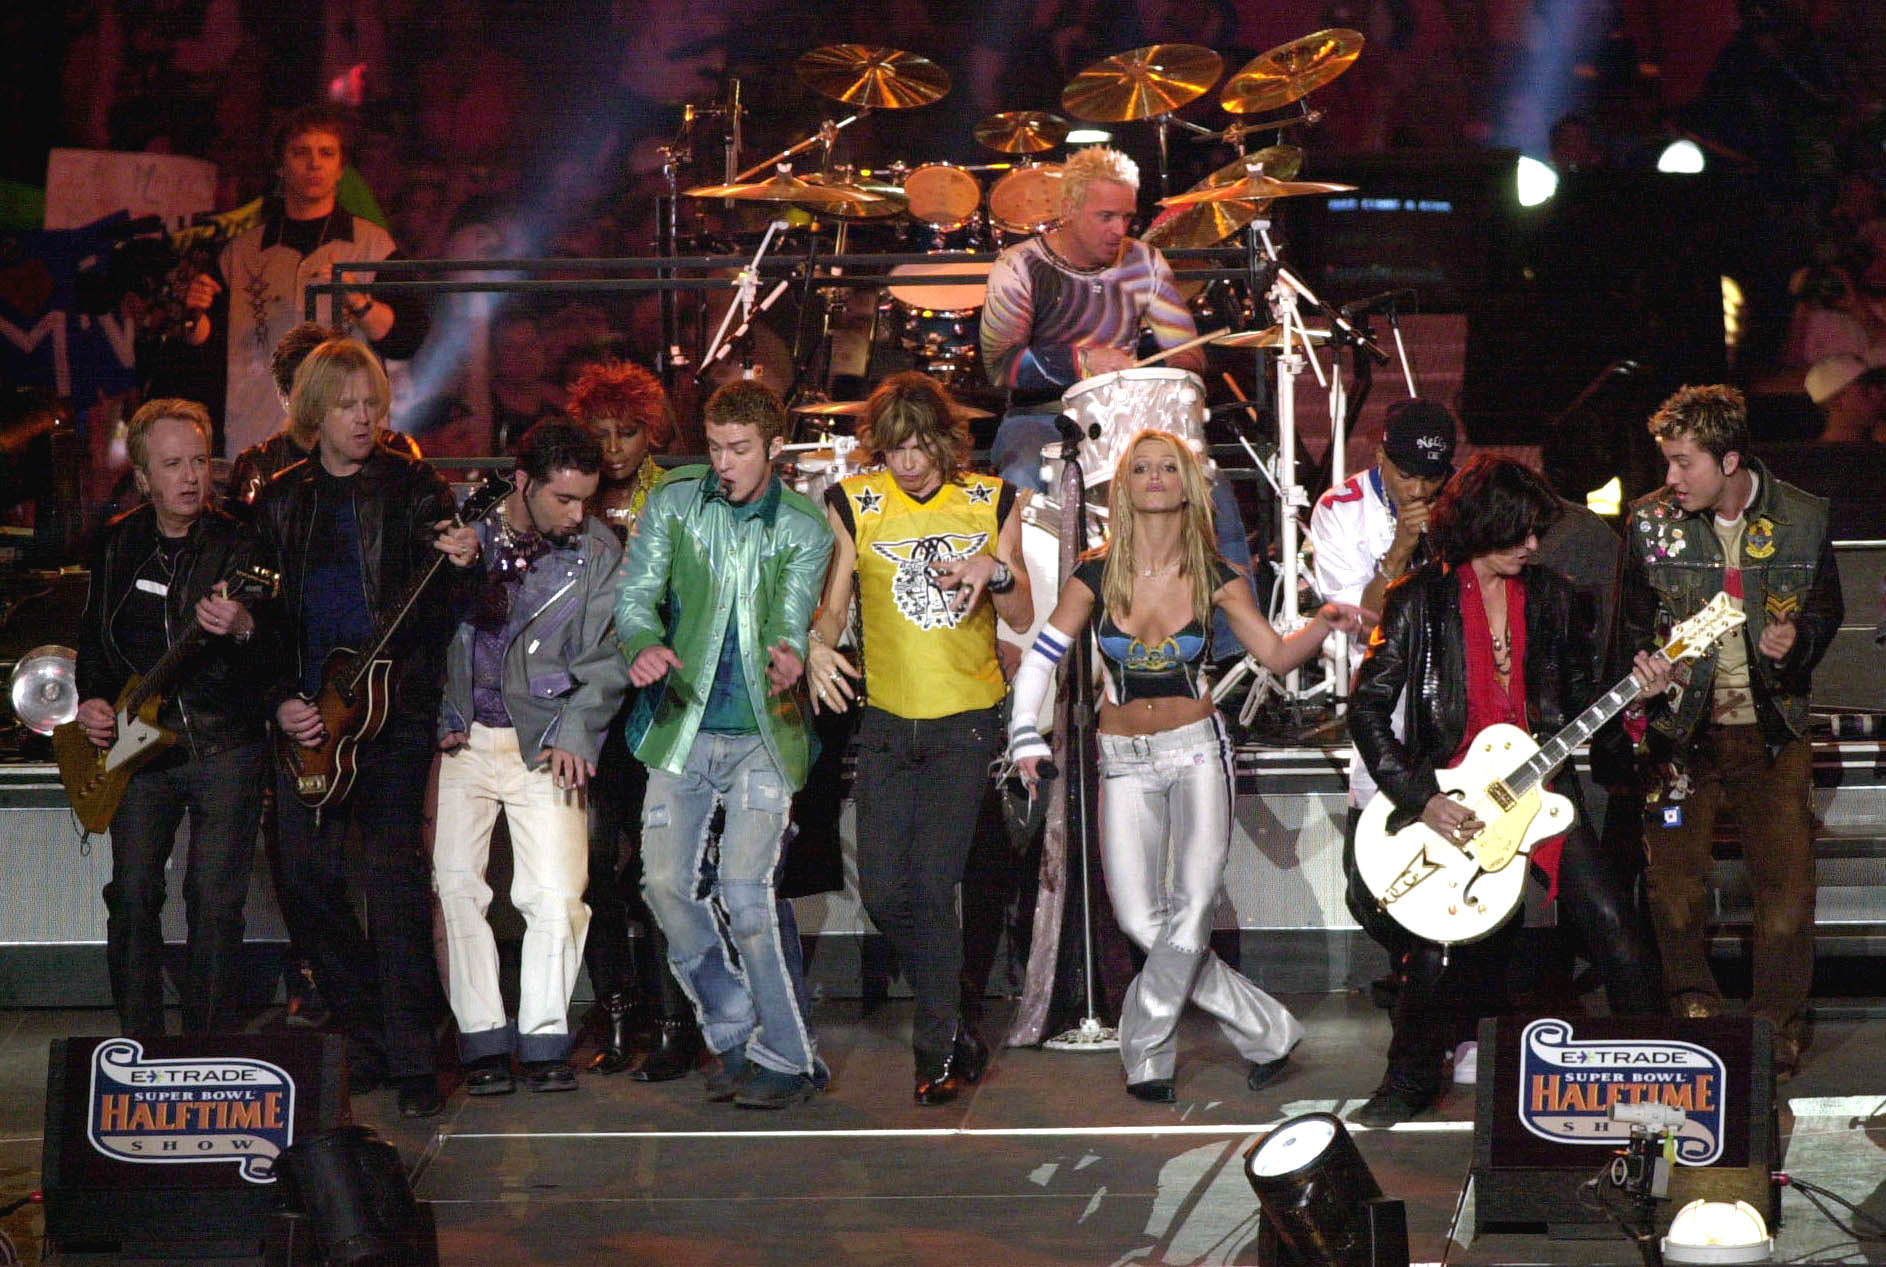 NSYNC, Aerosmith and Britney Spears all perform during the halftime show for Super Bowl XXXV